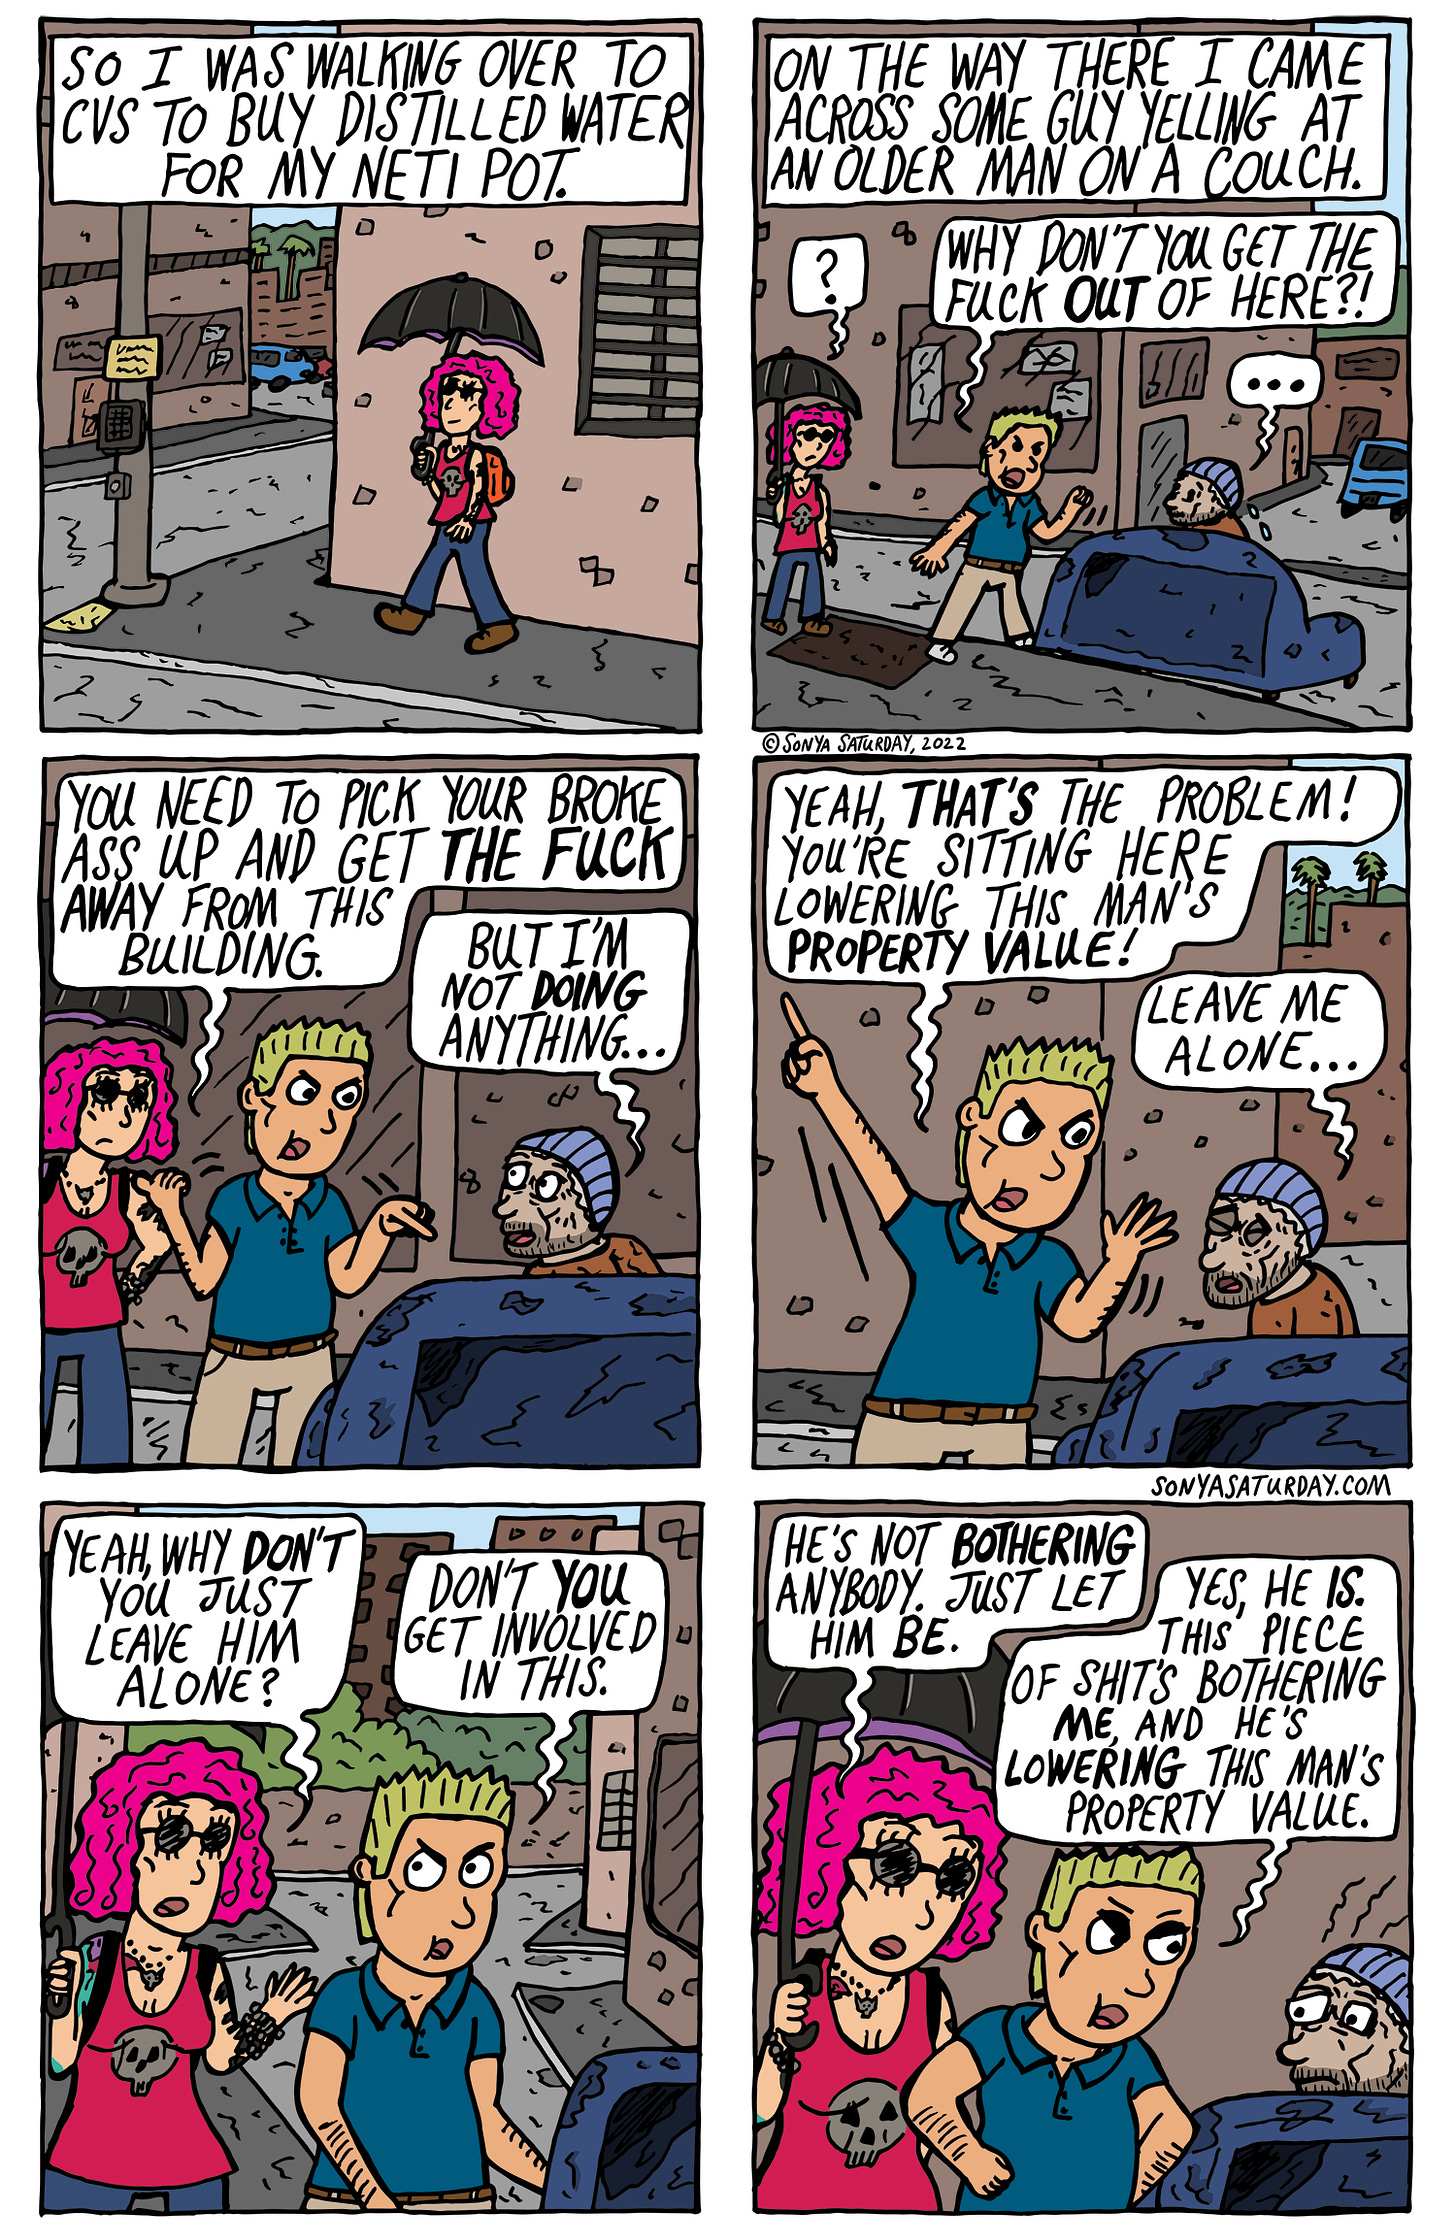 Comic strip in which Sonya Saturday confronts a douchey guy yelling at a homeless man